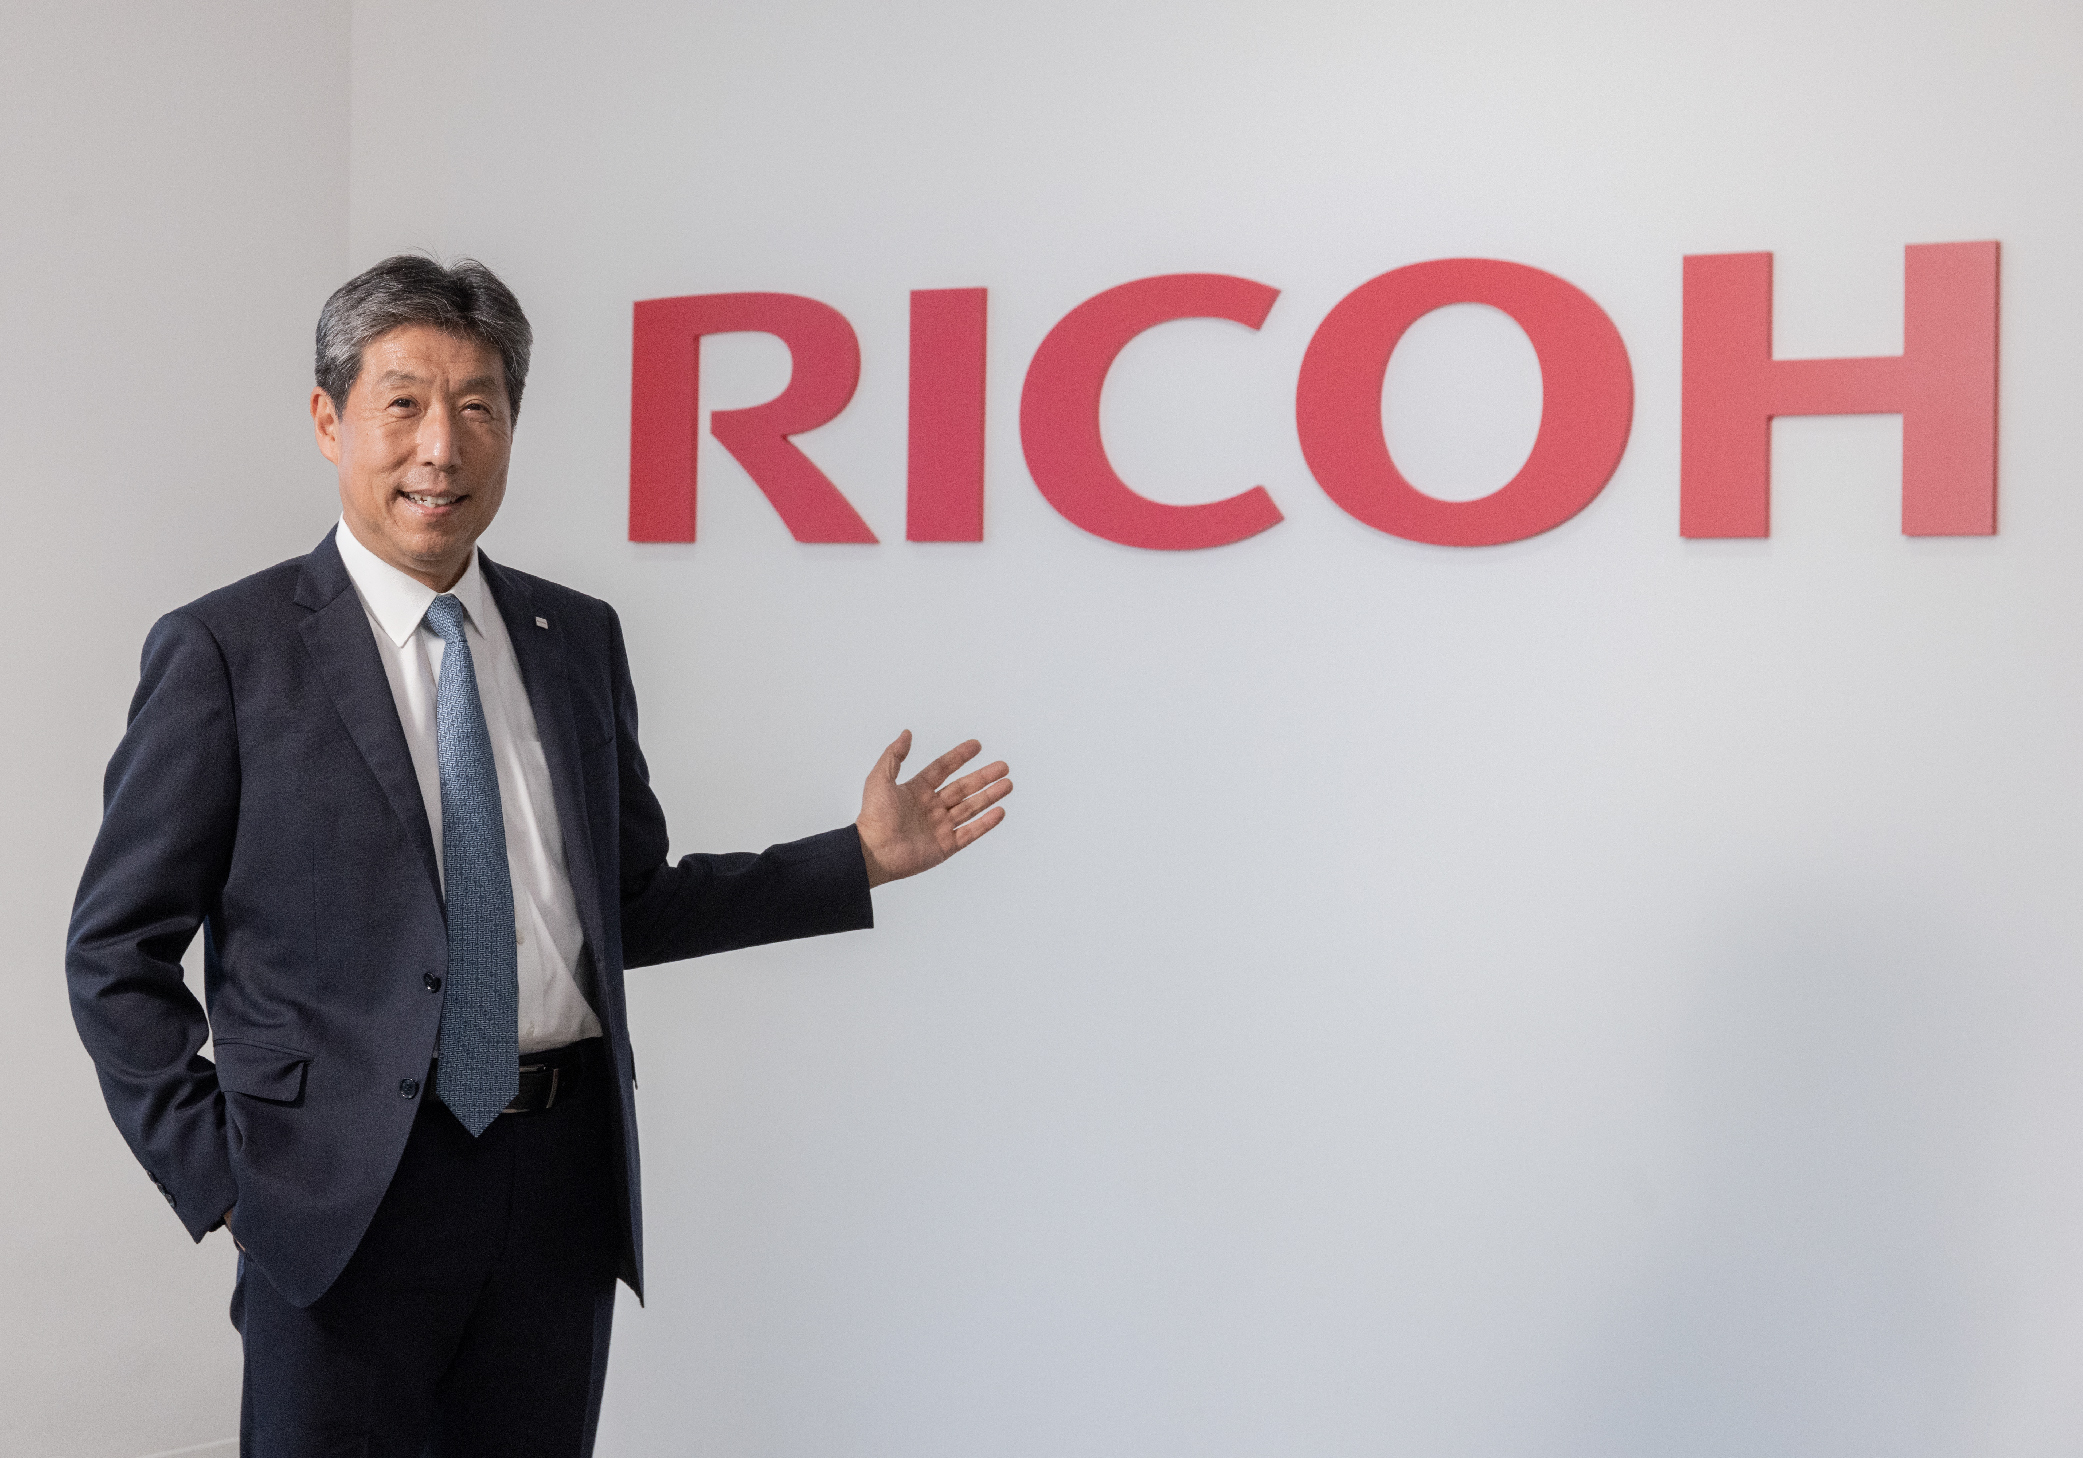 Joji Tokunaga led Ricoh to focus on four key areas of expertise to help customers transform their businesses and thrive